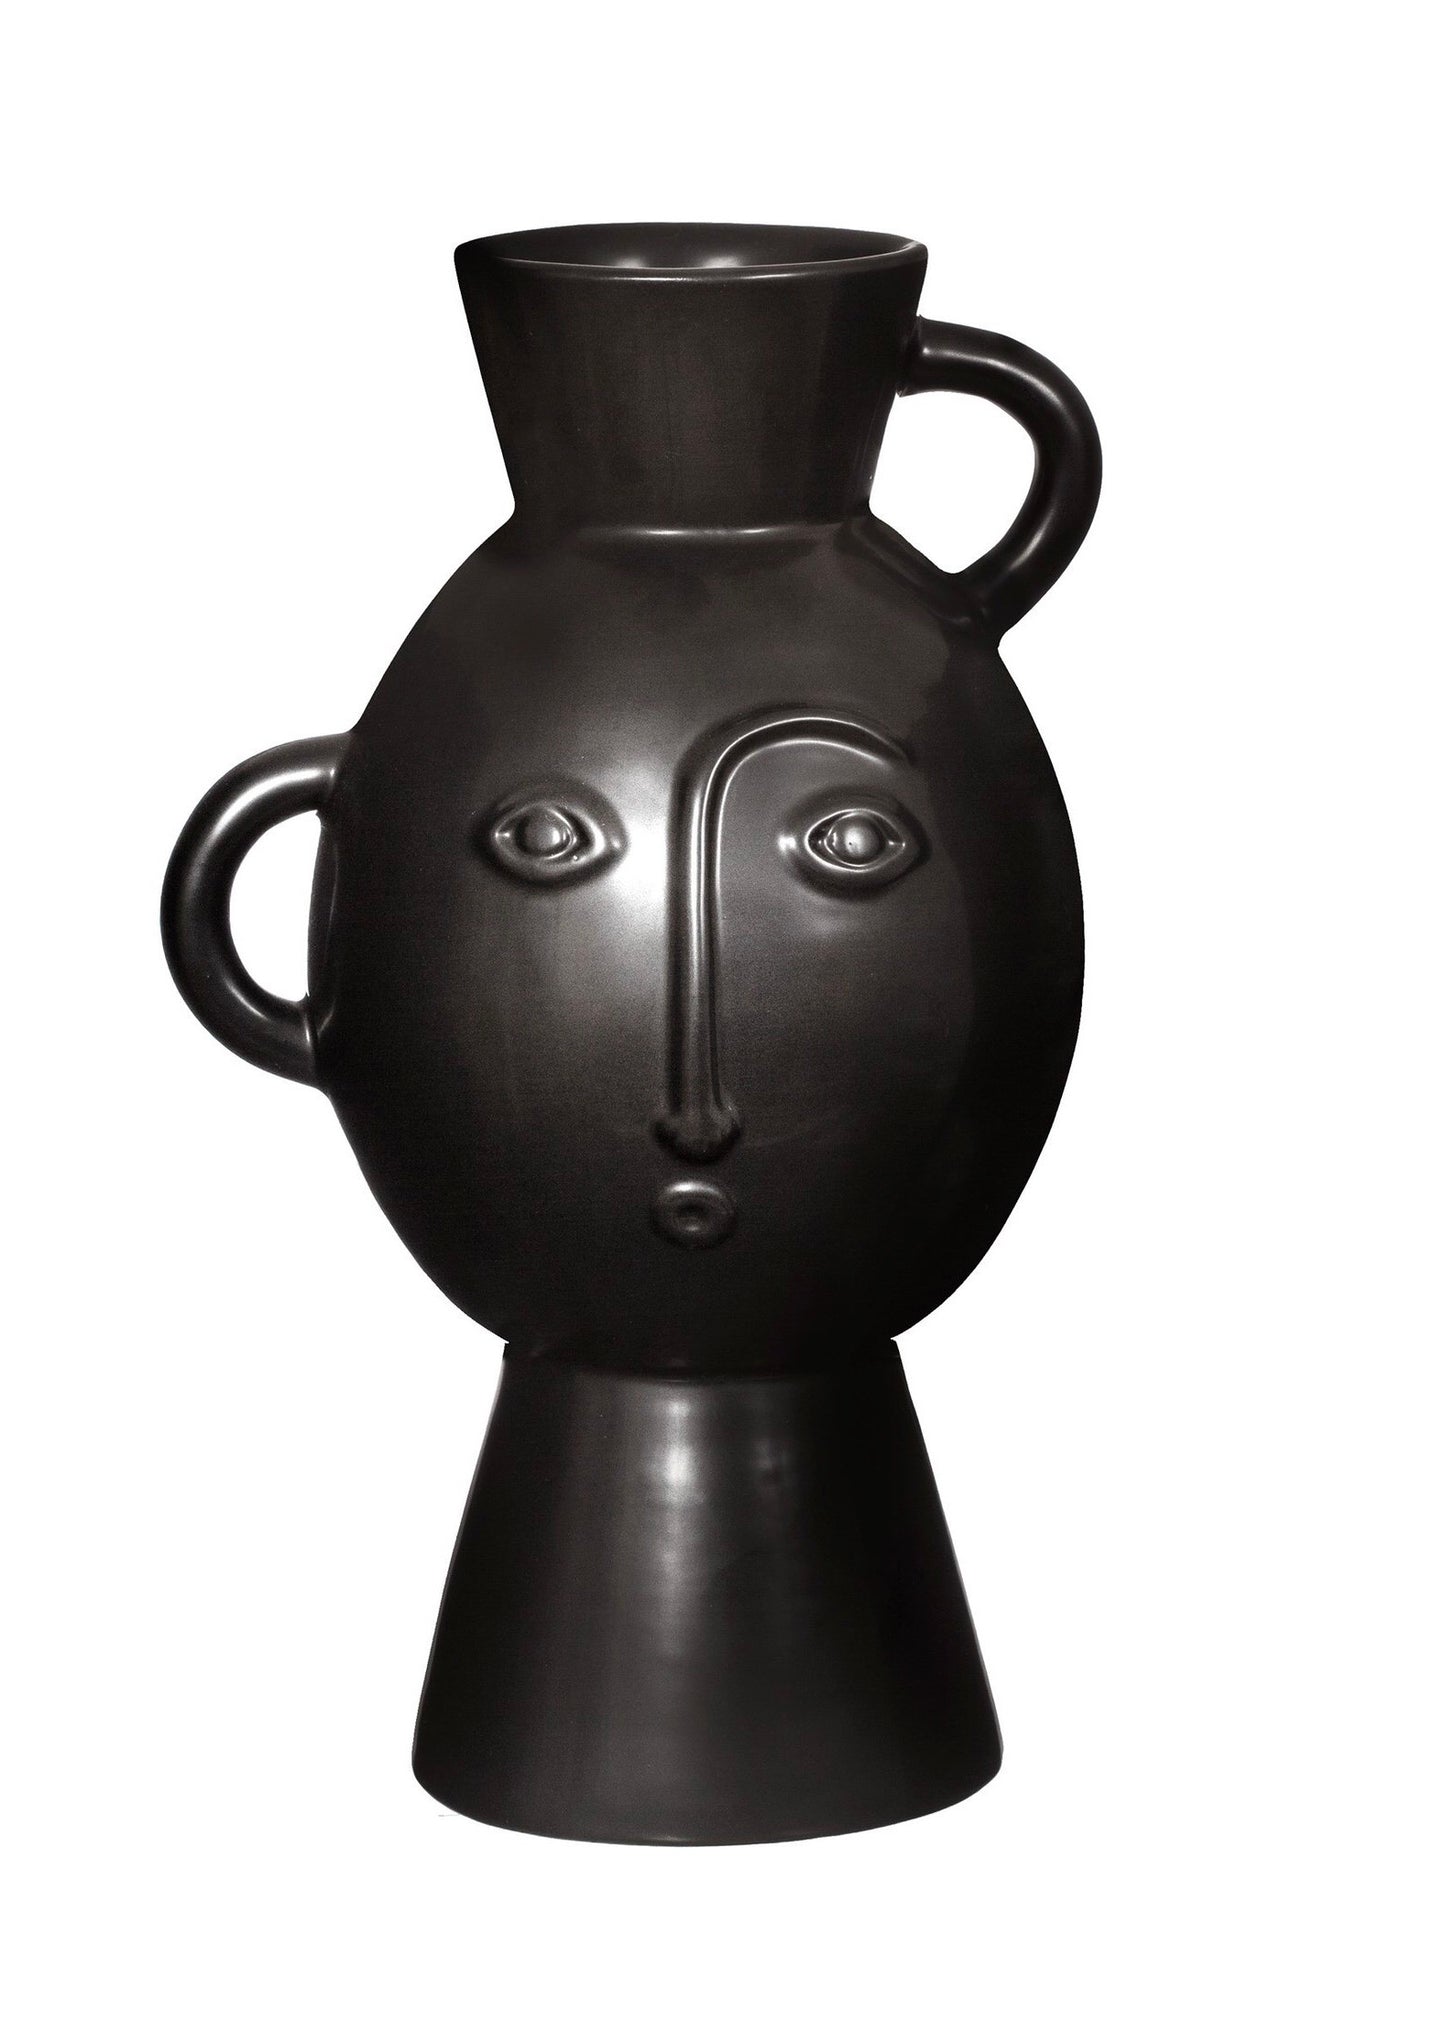 Matt black vase with handles and face details 